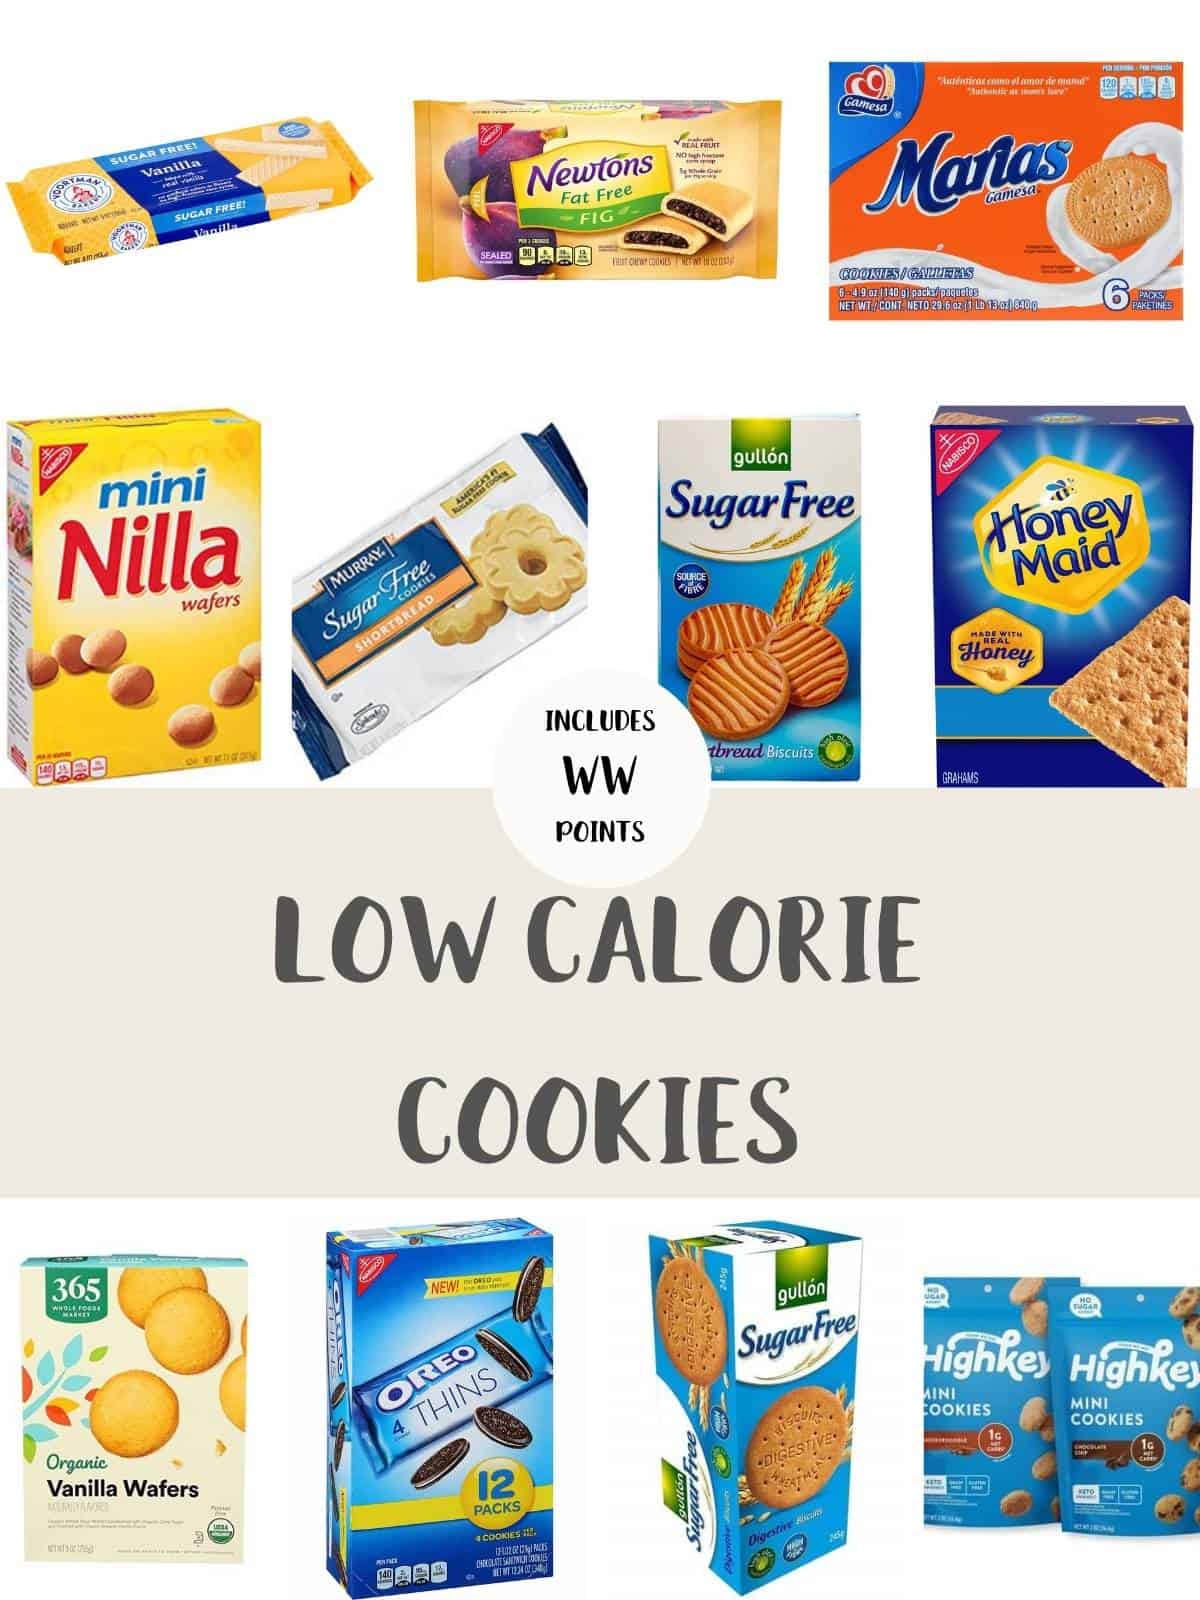 A photo collage of packets of cookies with text overlay stating Low Calorie Cookies.